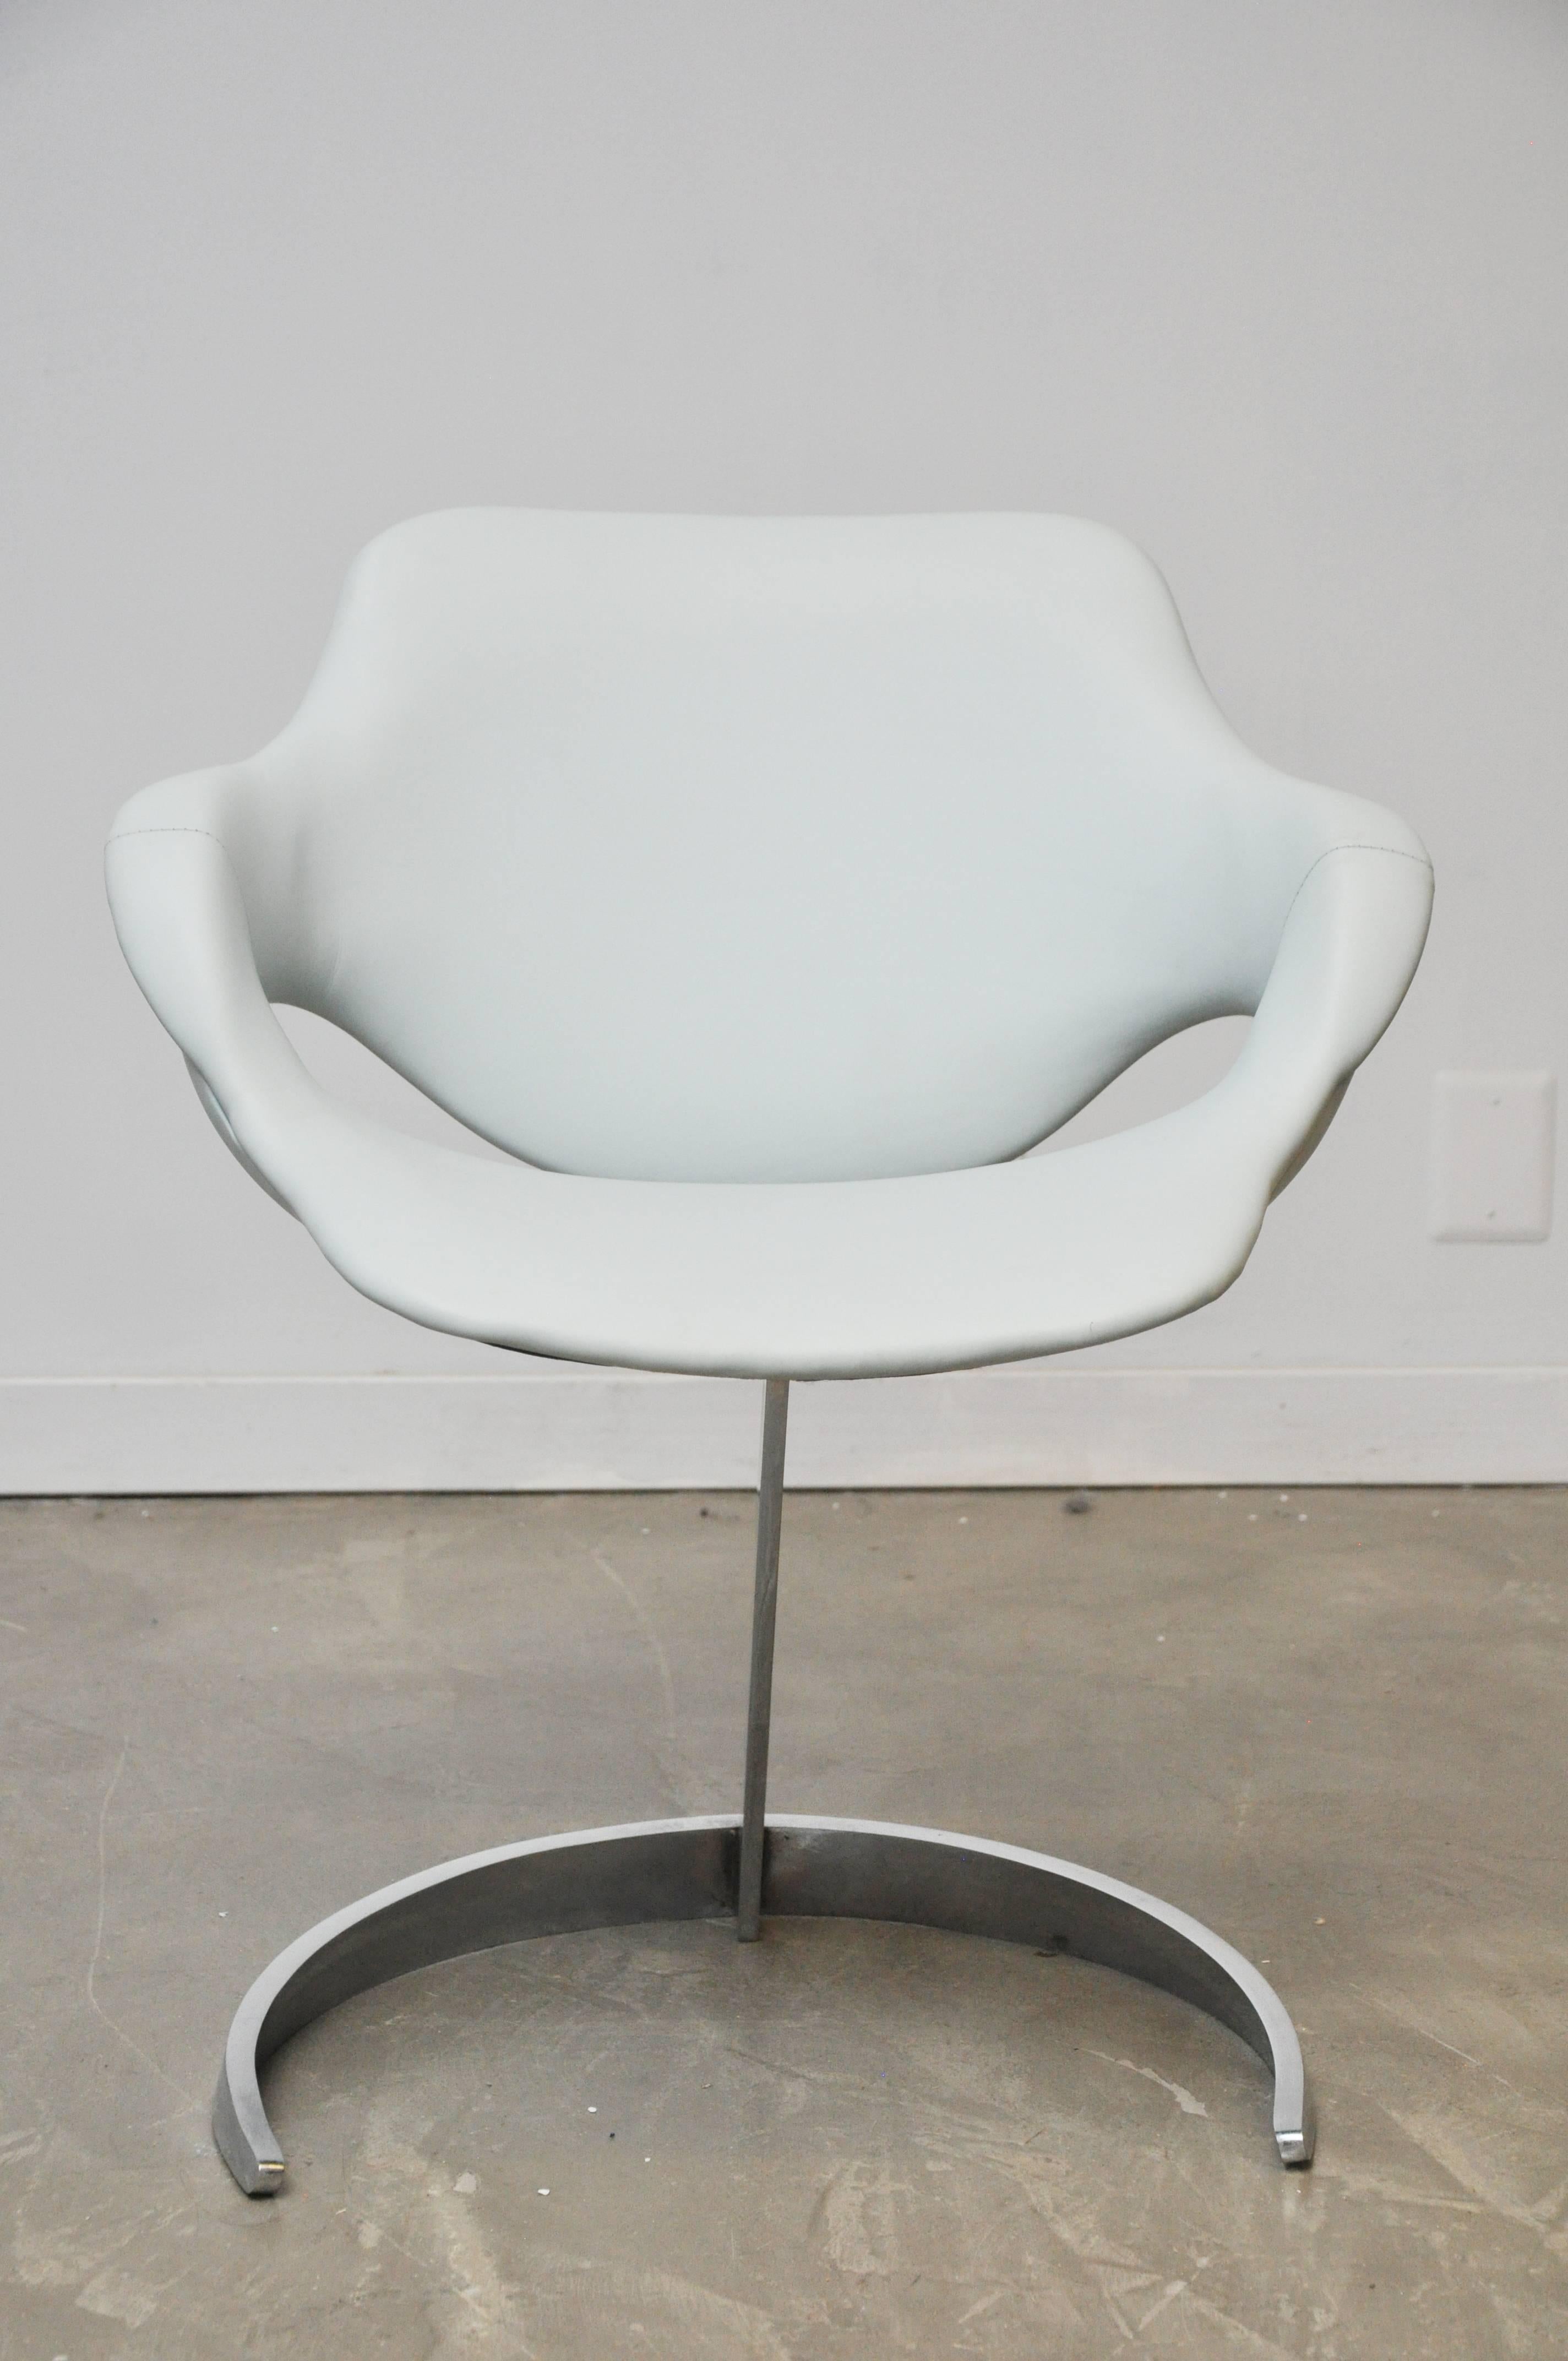 French modern chair, designed by Boris Tabakoff for Mobilier Modulaire Moderne. Reupholstered in soft blue leather.